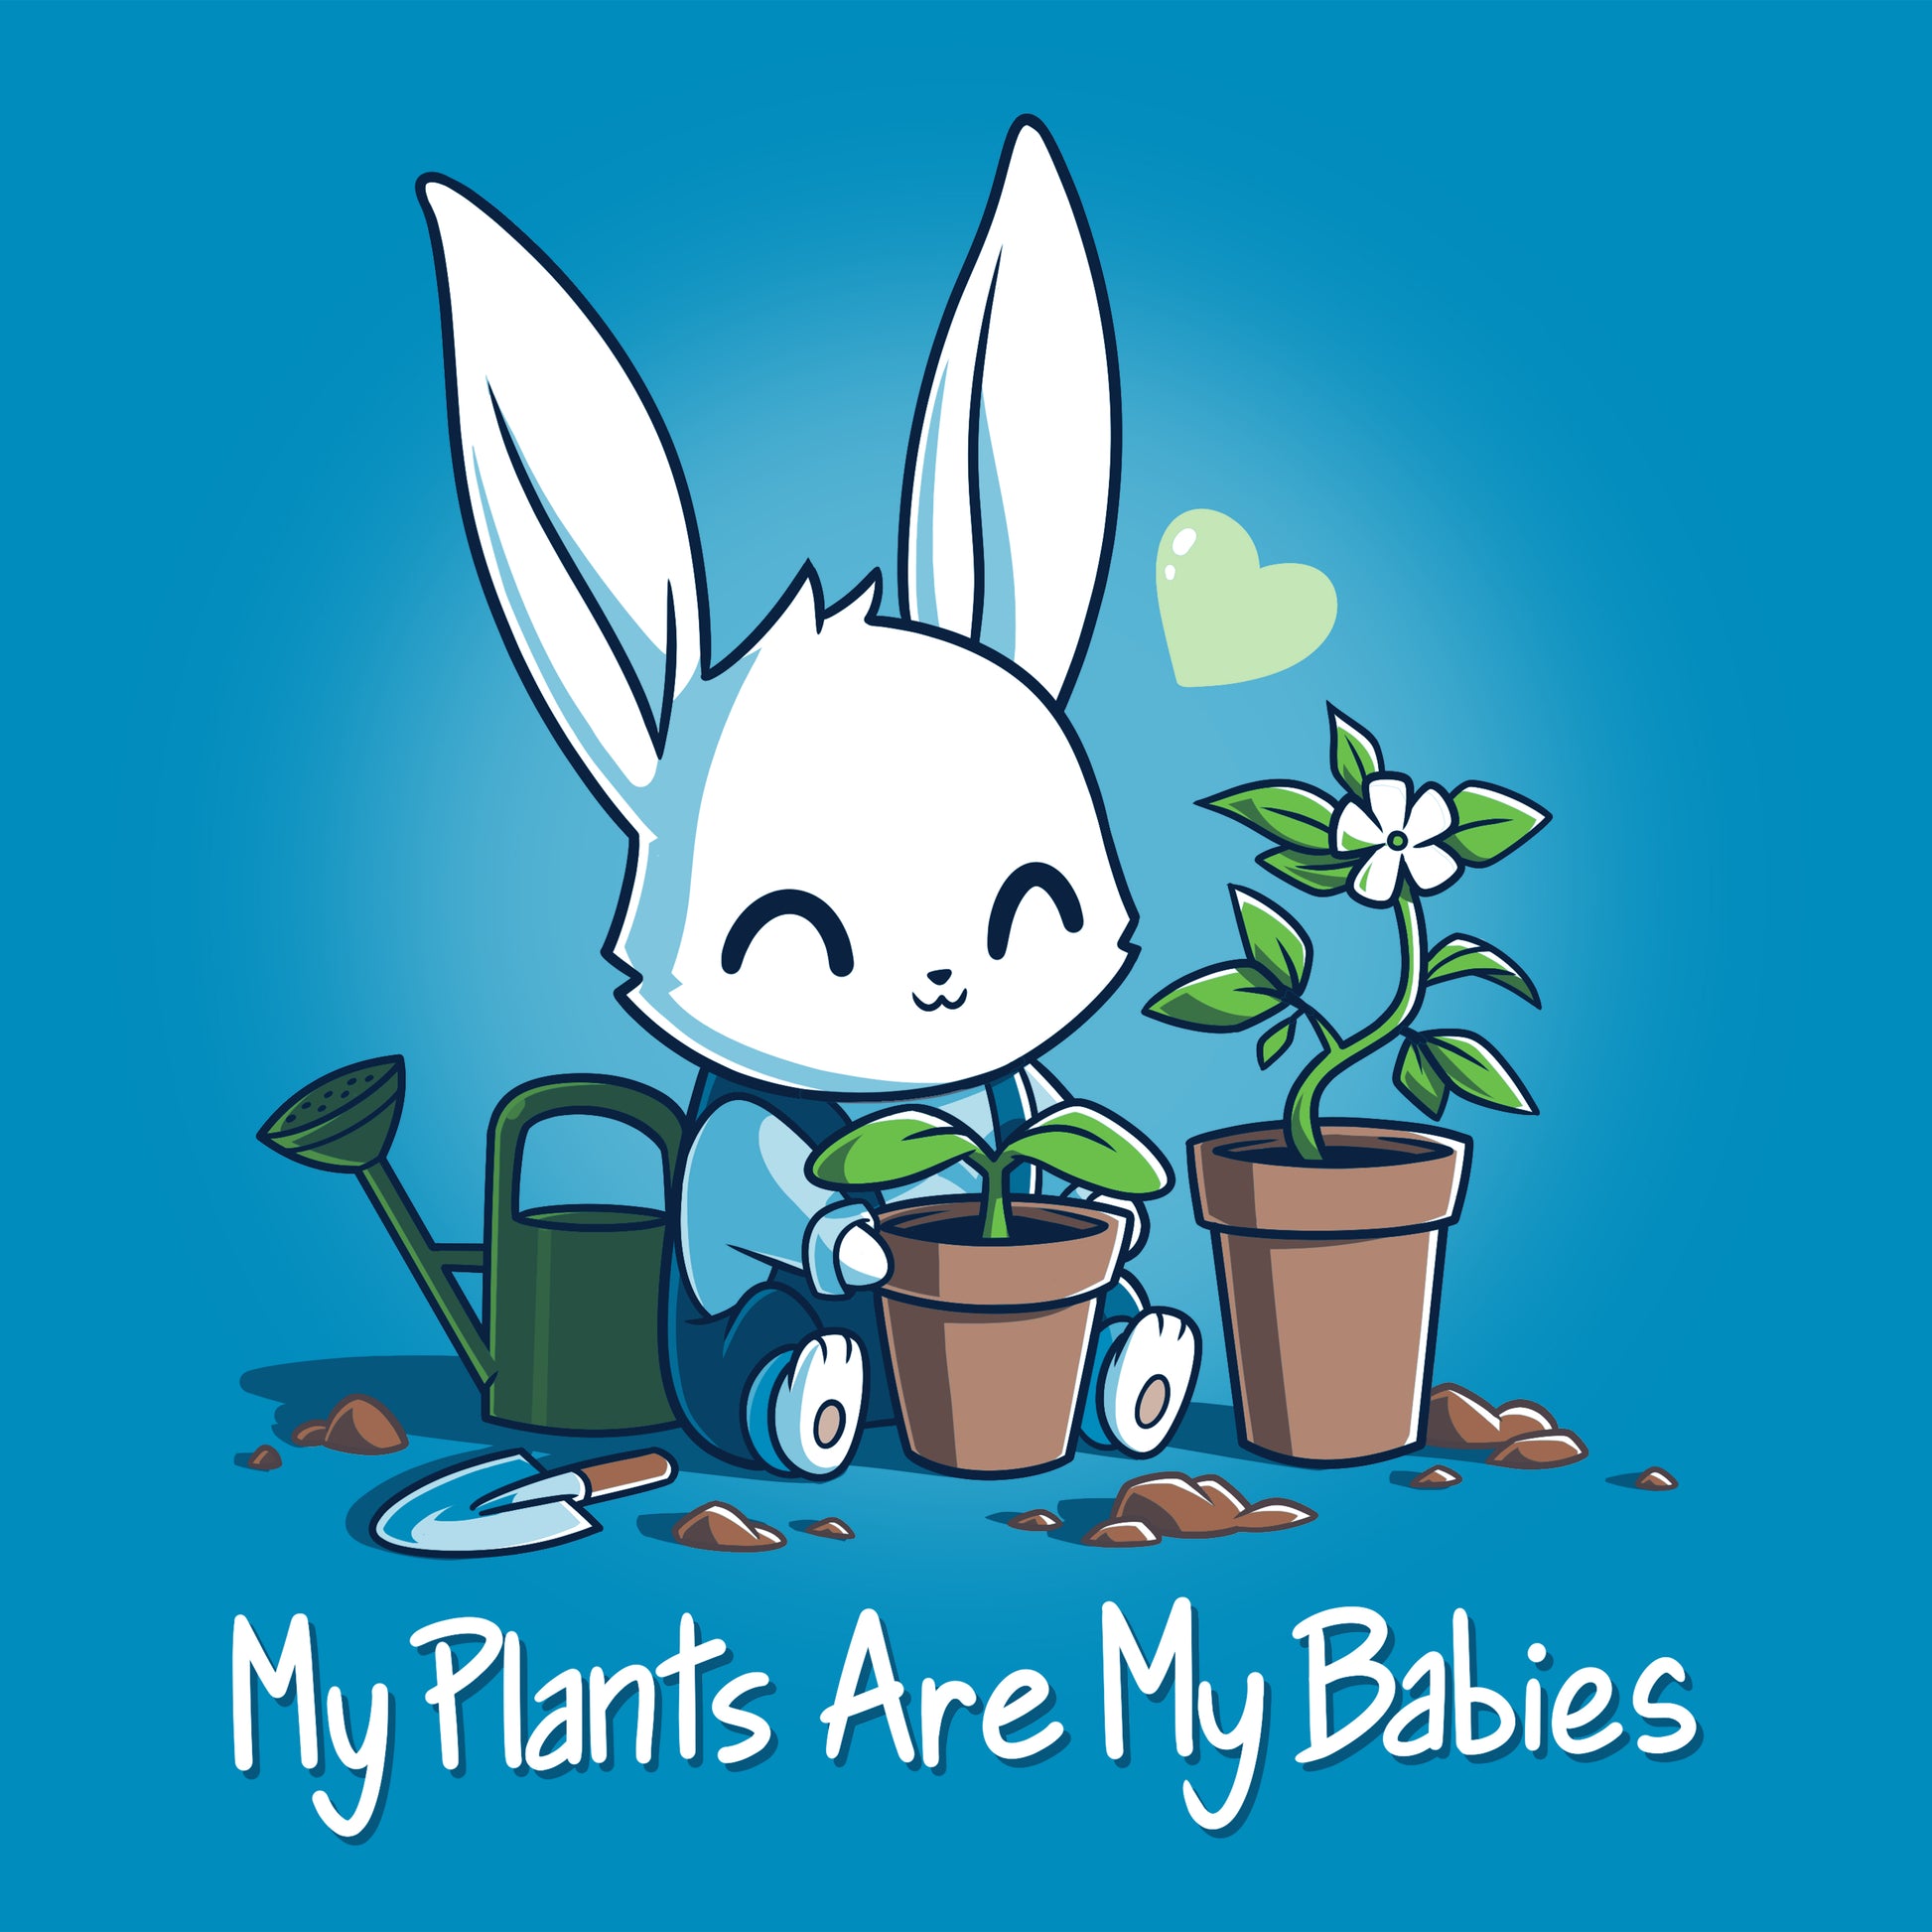 My My Plants Are My Babies are my TeeTurtle green thumb babies.